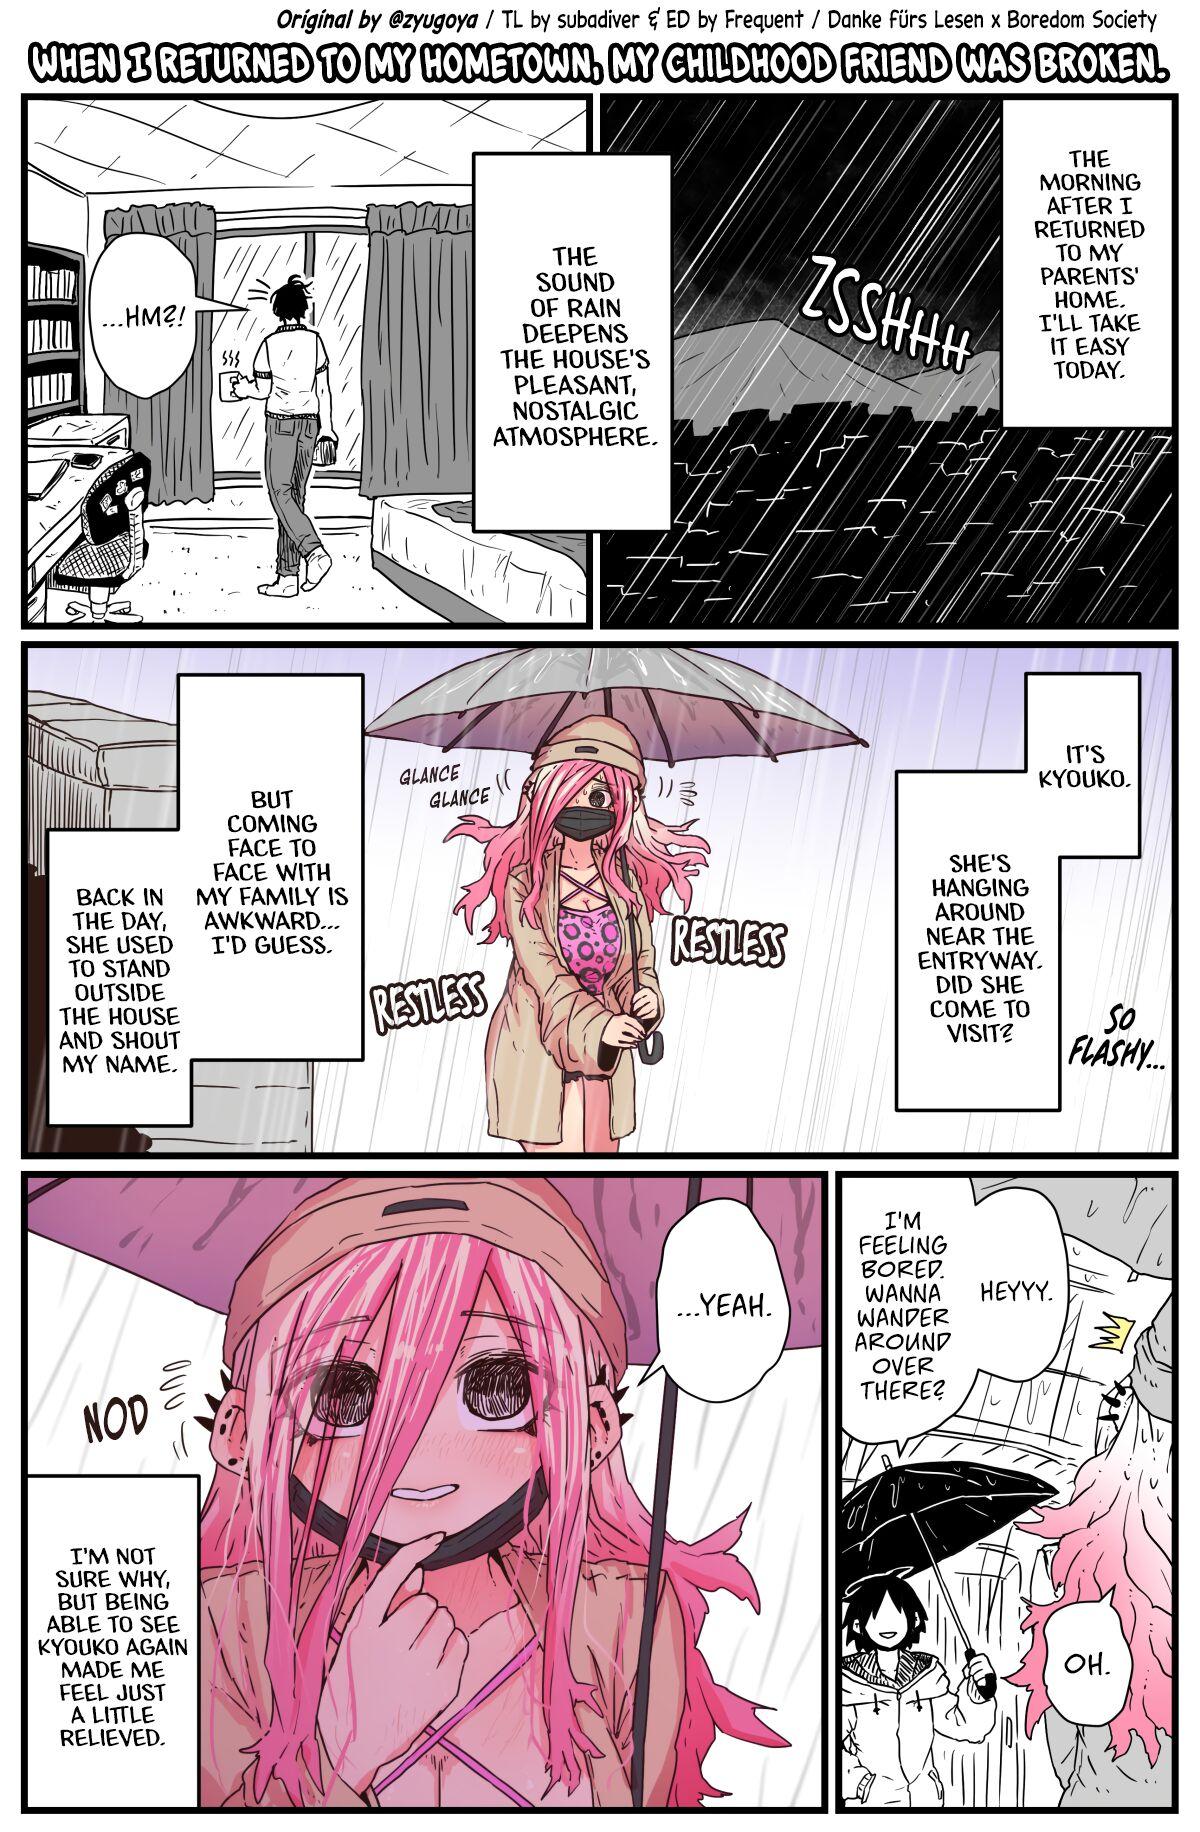 Mmf When I Returned to My Hometown, My Childhood Friend was Broken - Original Amatoriale - Page 7